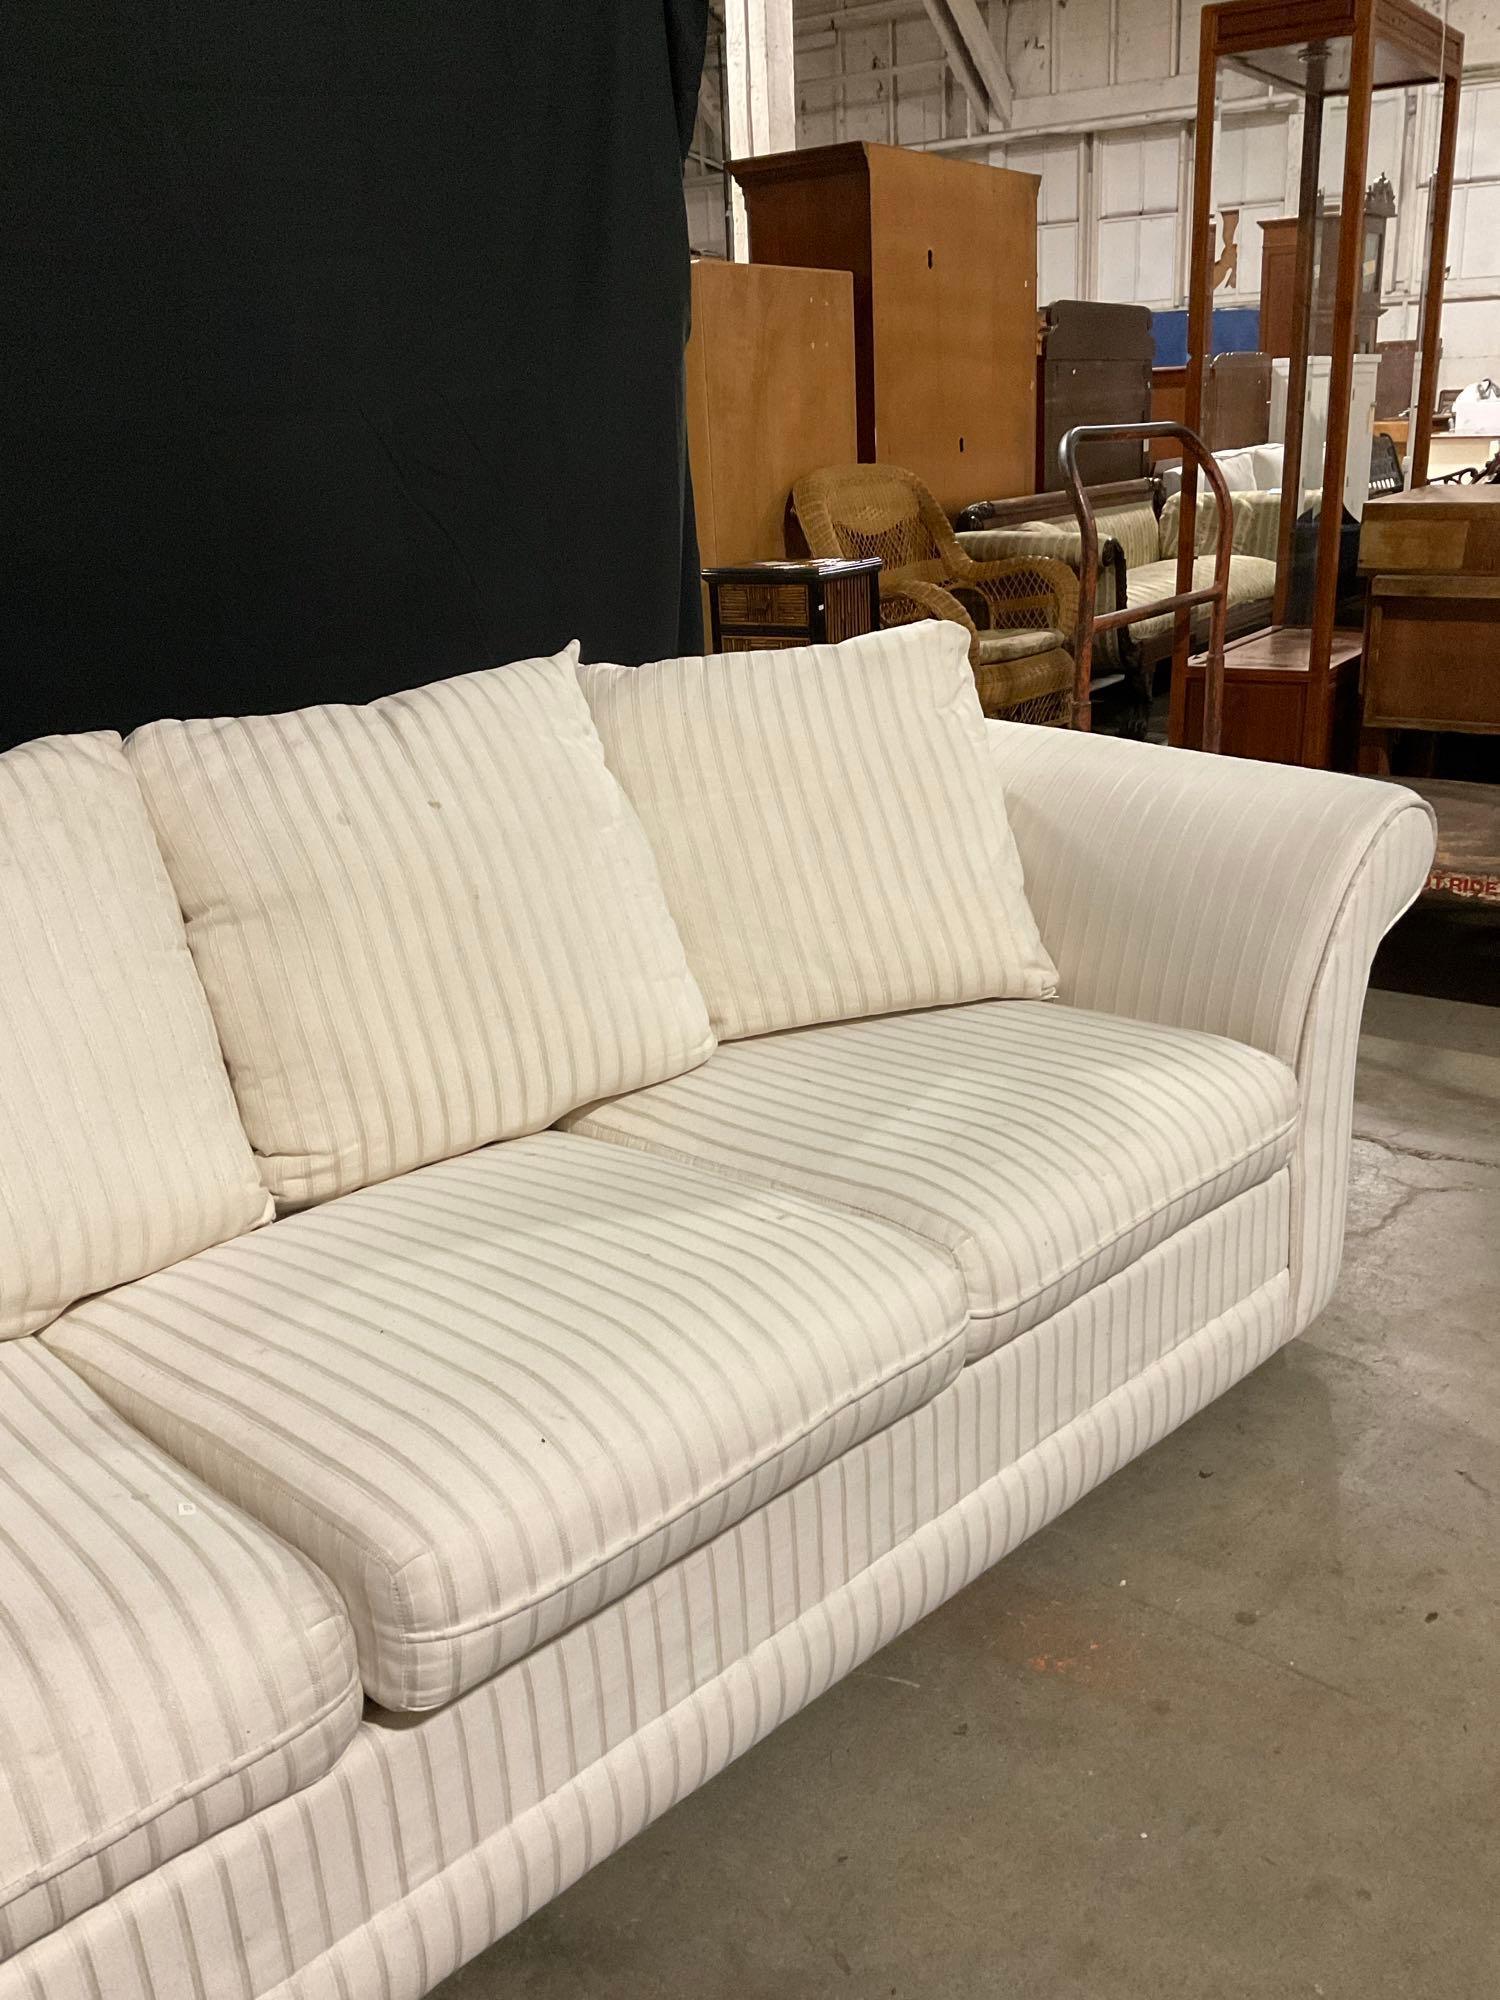 Vintage White Three Cushion Couch w/ Queen Sized Hideaway Bed. See pics.